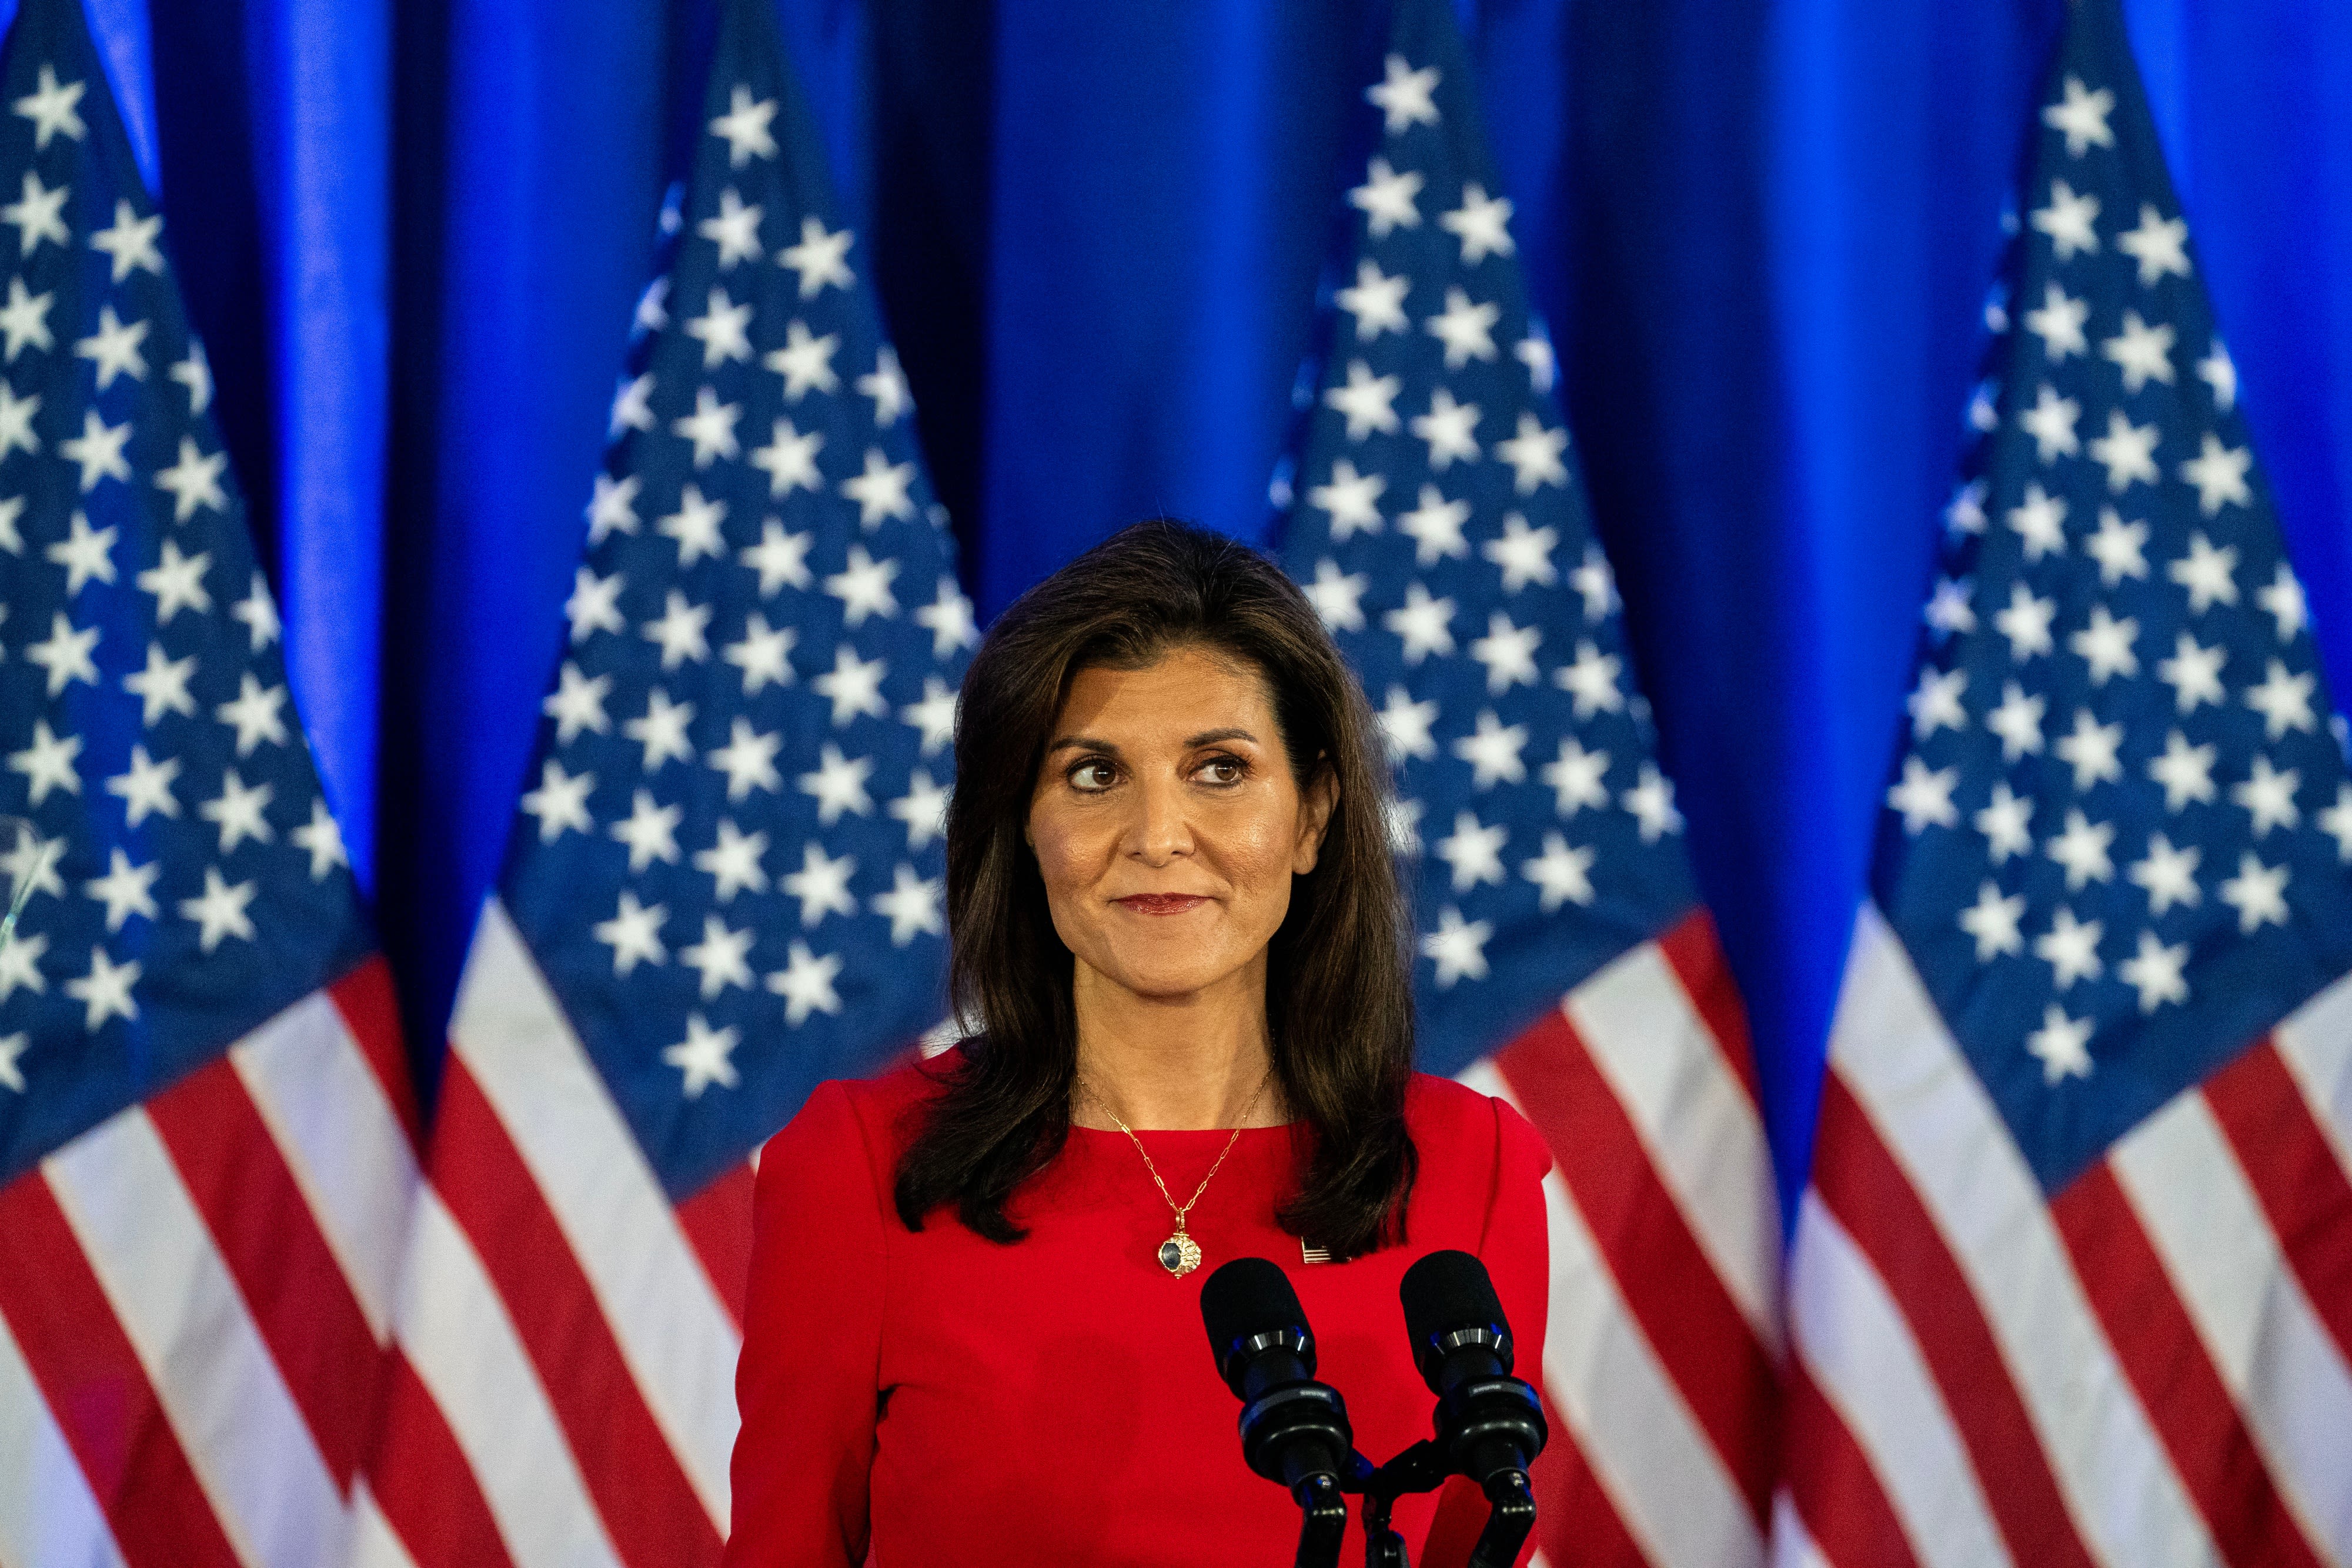 Analysis | Biden’s uphill battle with Haley supporters